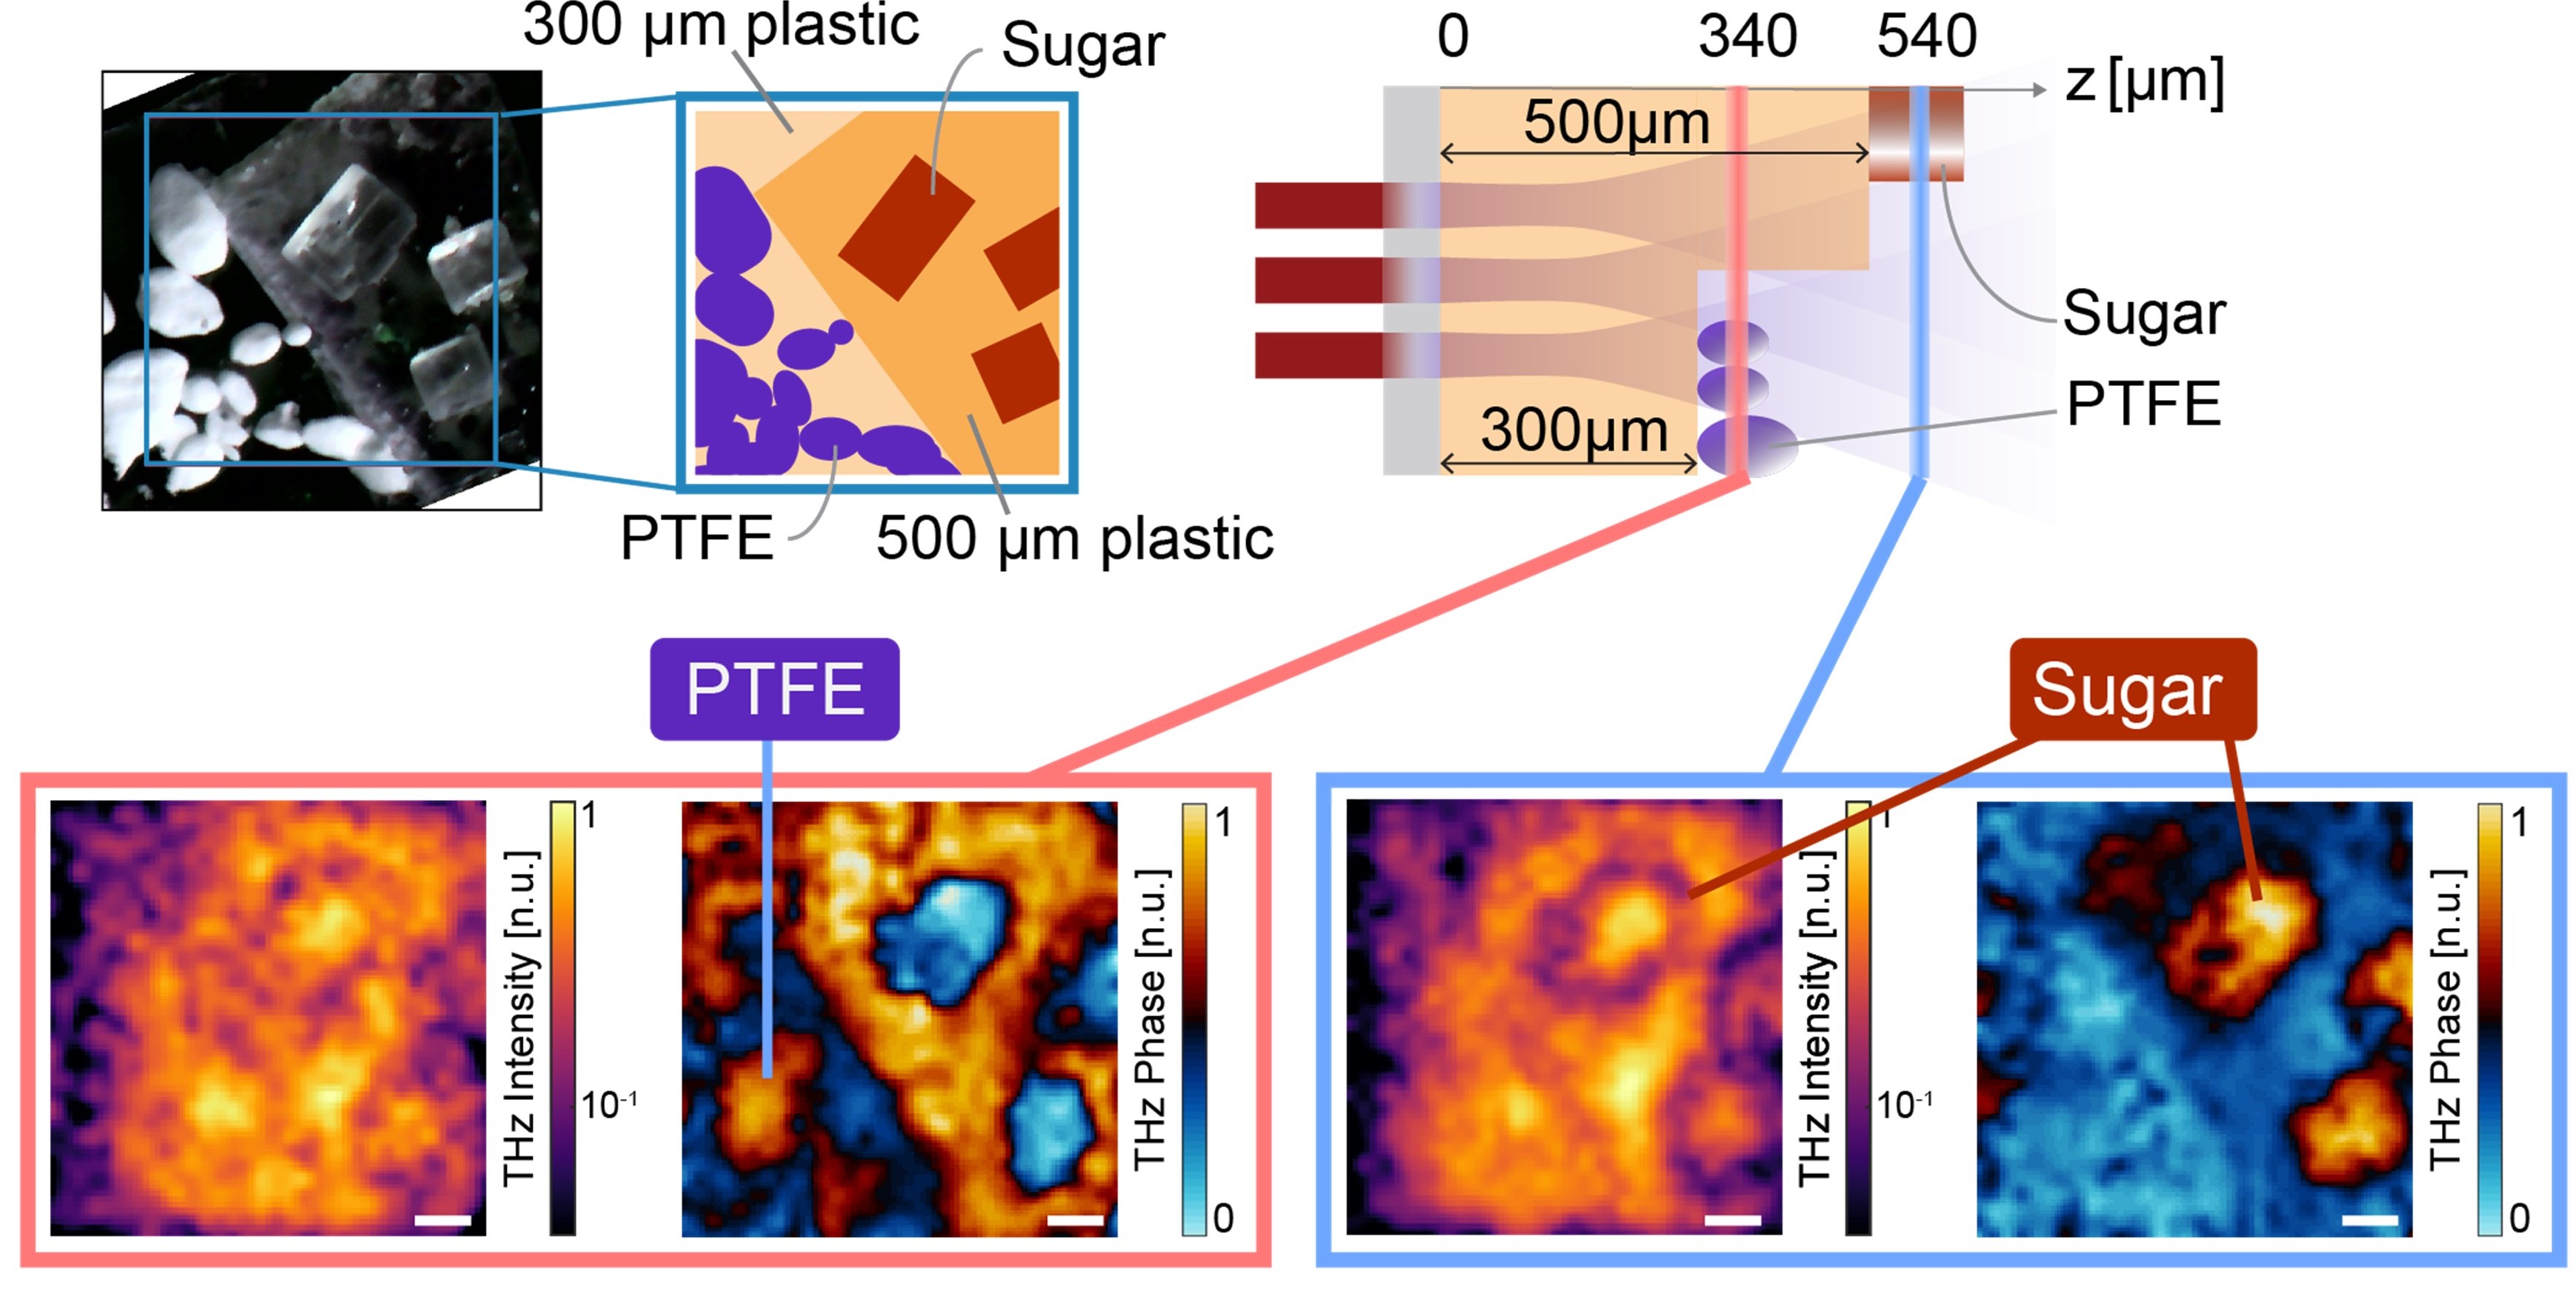 Top, from left to right: photographic image of the cube with objects embedded in it; a graphical sketch showing at which depth the objects - made of plastic, sugar and PTFE (a synthetic polymer) - are located (300-500 micrometres (μm)) are embedded; a 3D graphical sketch showing terrahetz waves passing through the cube. Bottom: Real images captured by the terahertz wave camera. 